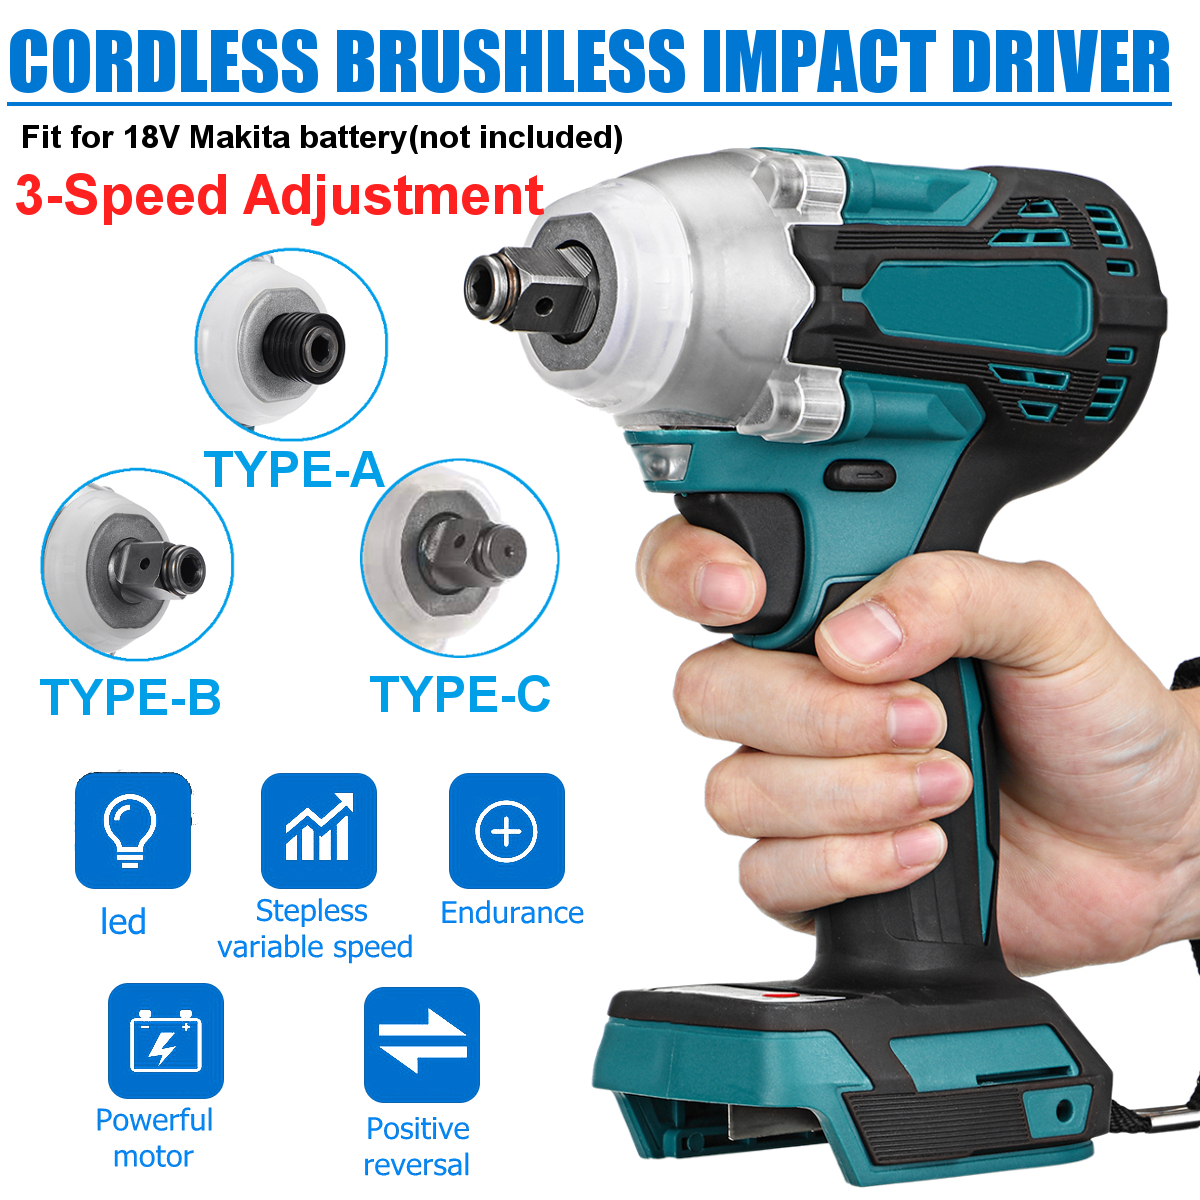 DTW300-2-in1-18V-800Nm-Li-Ion-Brushless-Cordless-12quot-Electric-Wrench-14quotScrewdriver-Drill-Repl-1854869-3